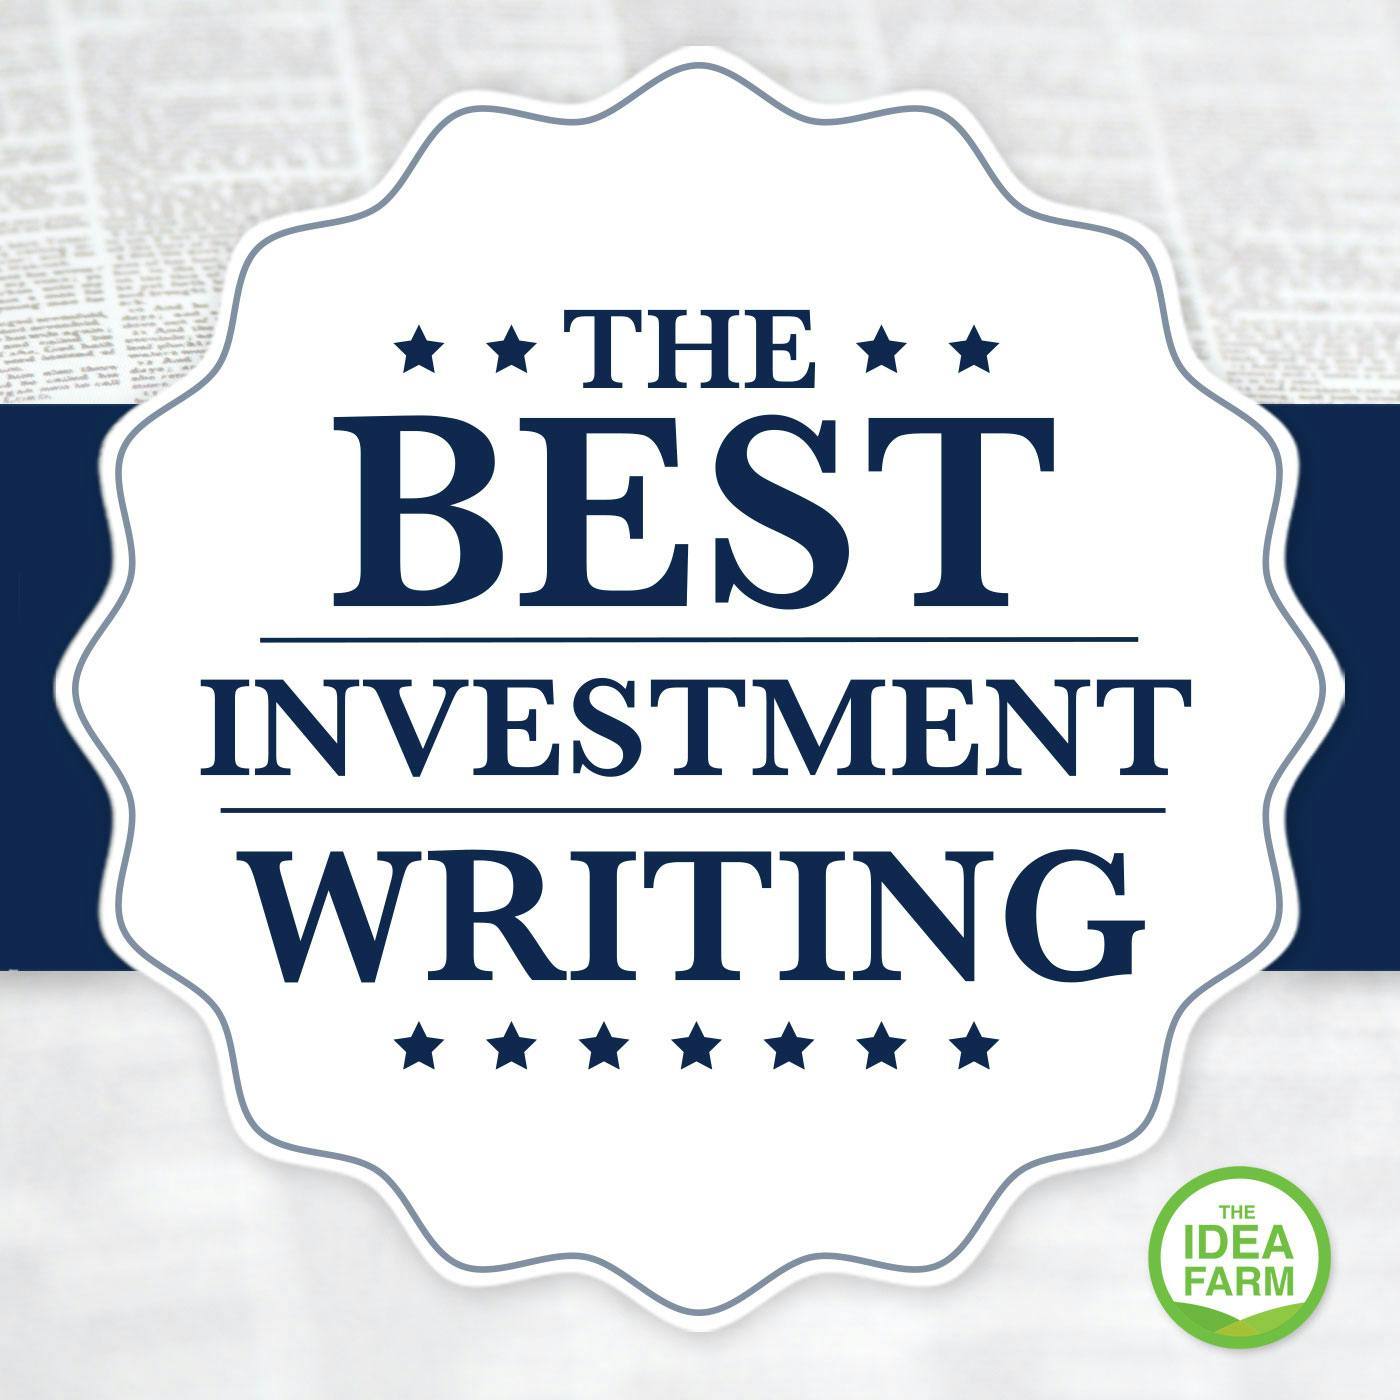 The Best Investment Writing Volume 5: John Pease, GMO – Value: If Not Now, When?